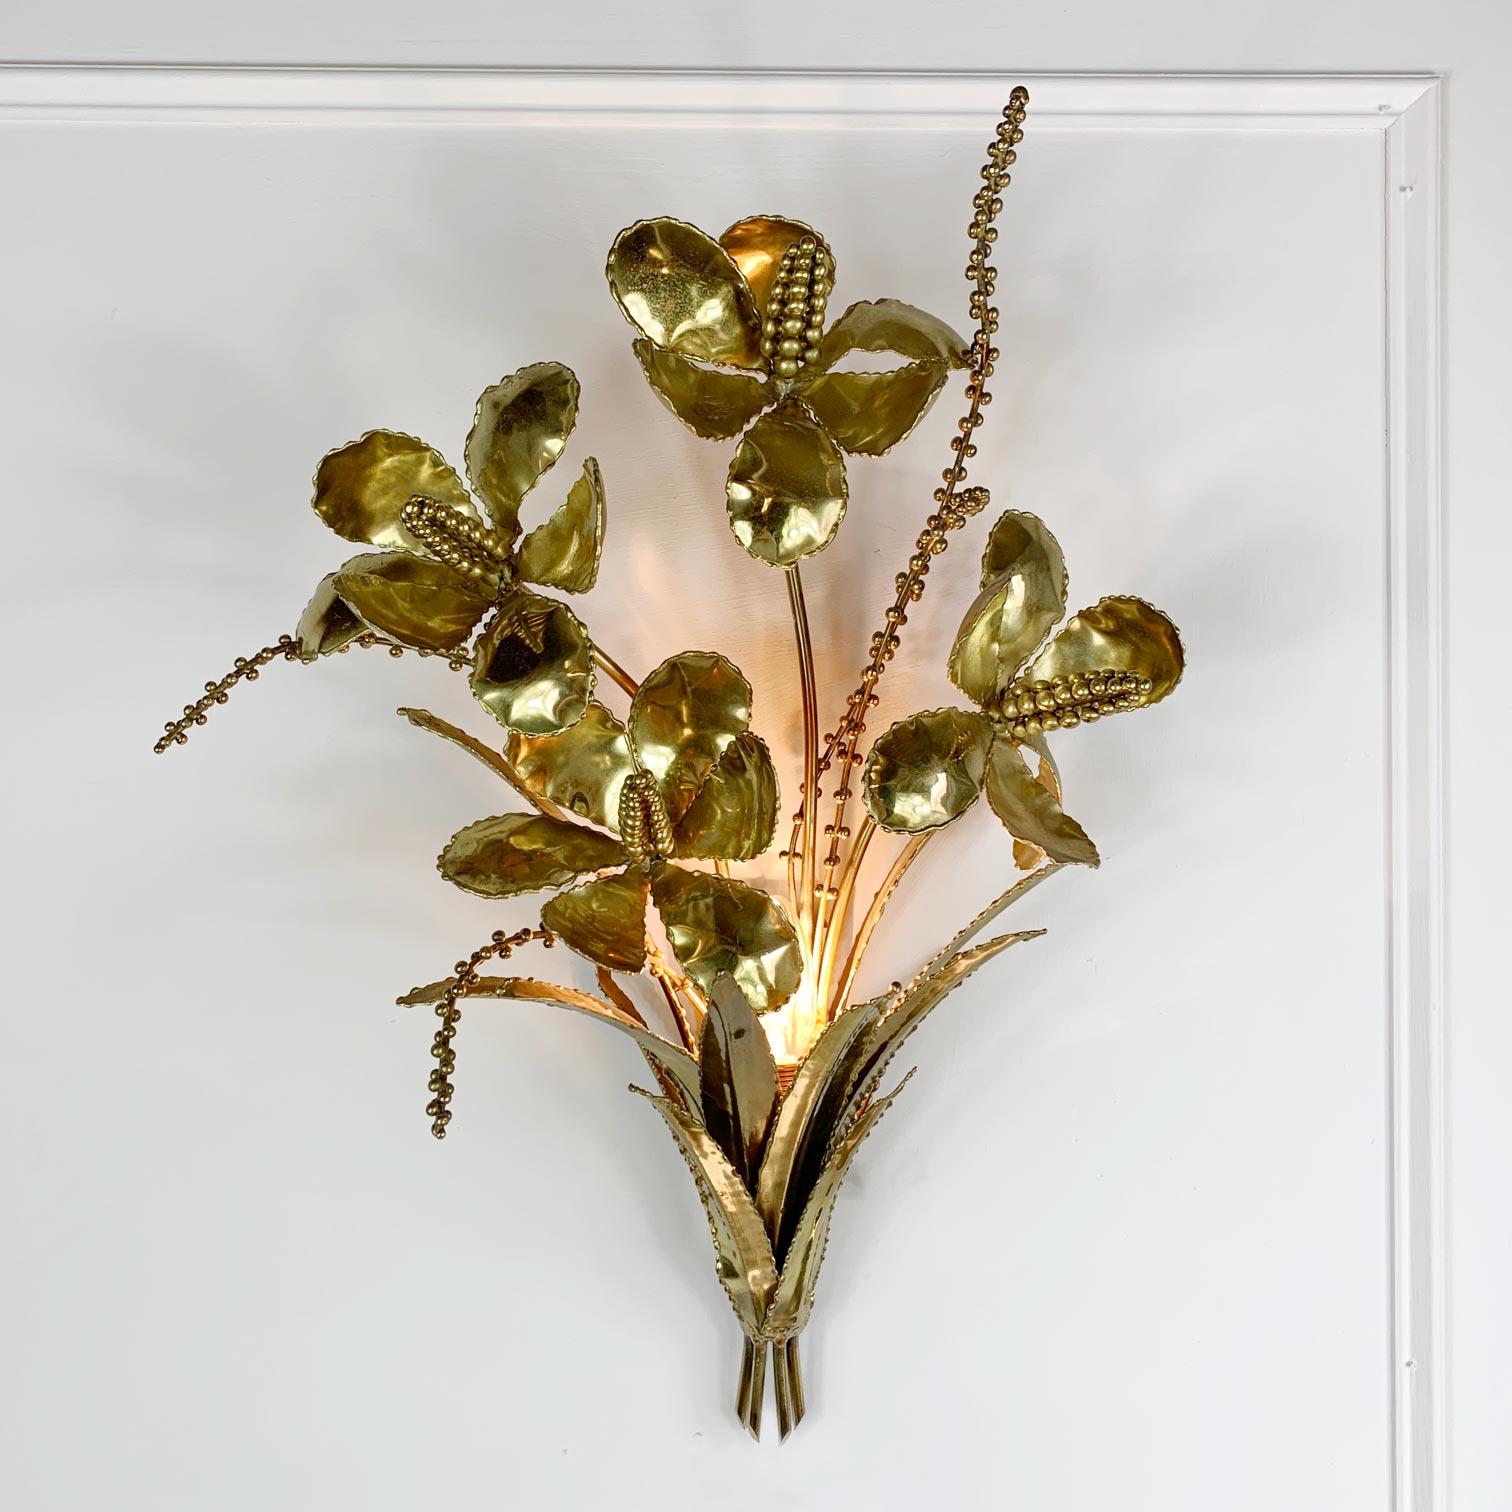 A superb piece of French Brutalist sculpture in the form of a spray of flowers, the large flower heads, surrounded with leaf and stem decoration.

Dating to the 1970’s the piece takes a single e14 (small screw in) bulb, that sits hidden the upward